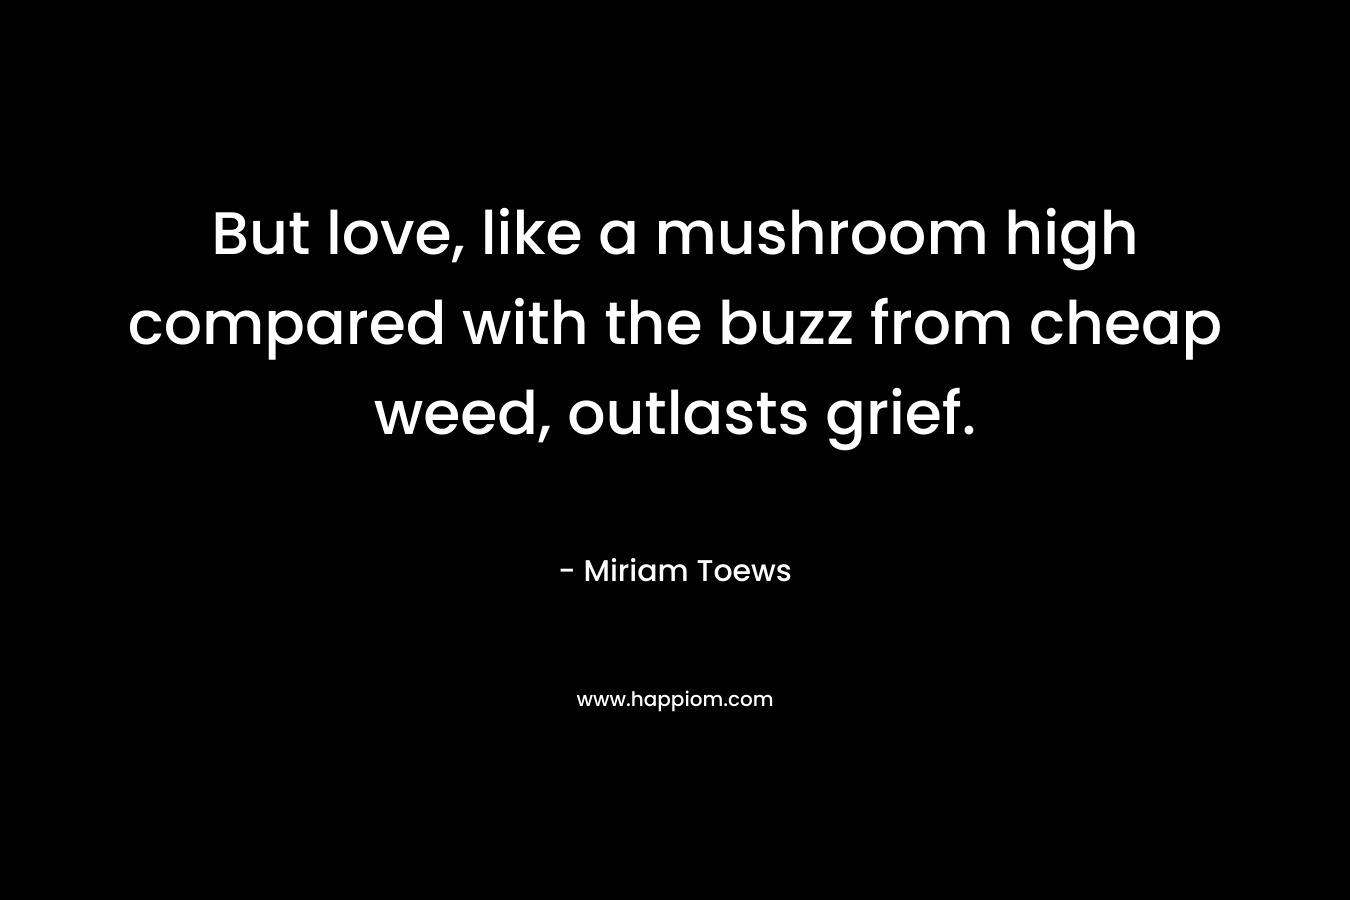 But love, like a mushroom high compared with the buzz from cheap weed, outlasts grief.